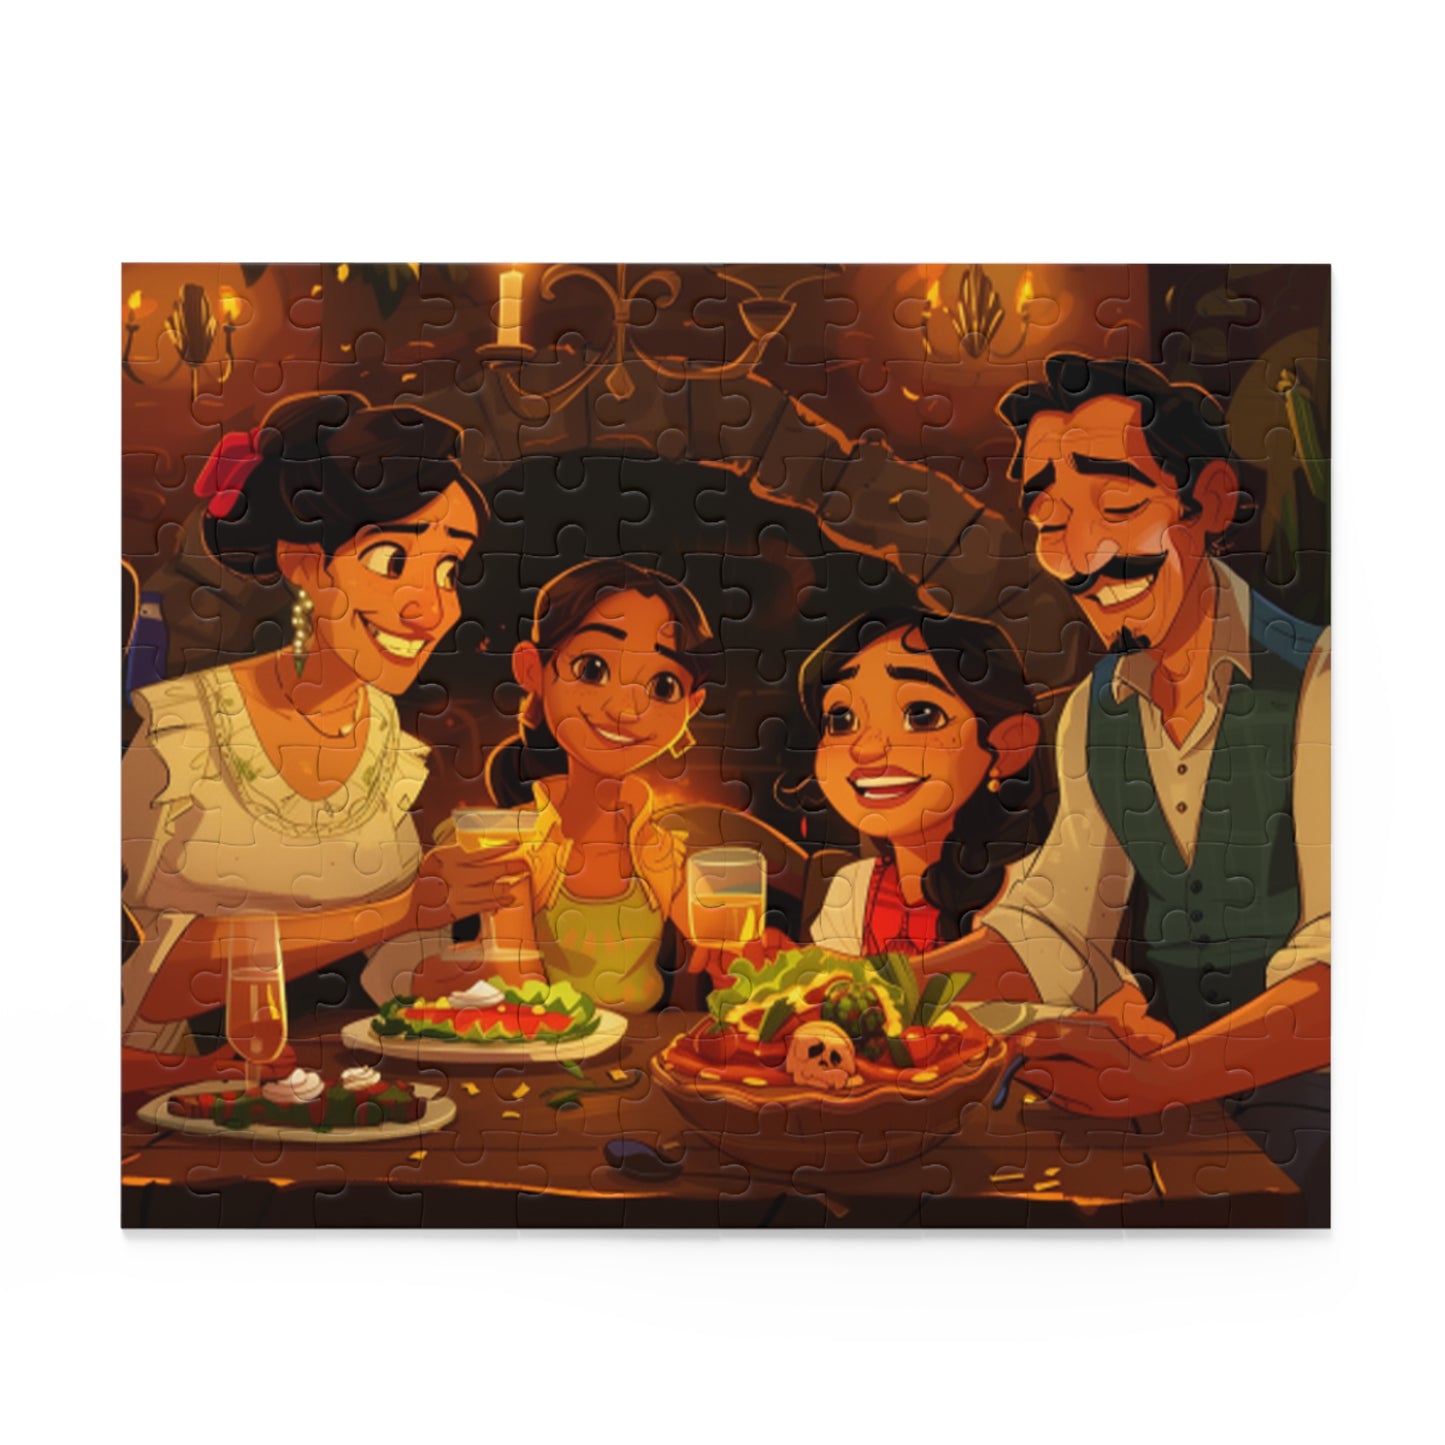 Mexican Lovely Family Dinner Retro Art Jigsaw Puzzle Adult Birthday Business Jigsaw Puzzle Gift for Him Funny Humorous Indoor Outdoor Game Gift For Her Online-2